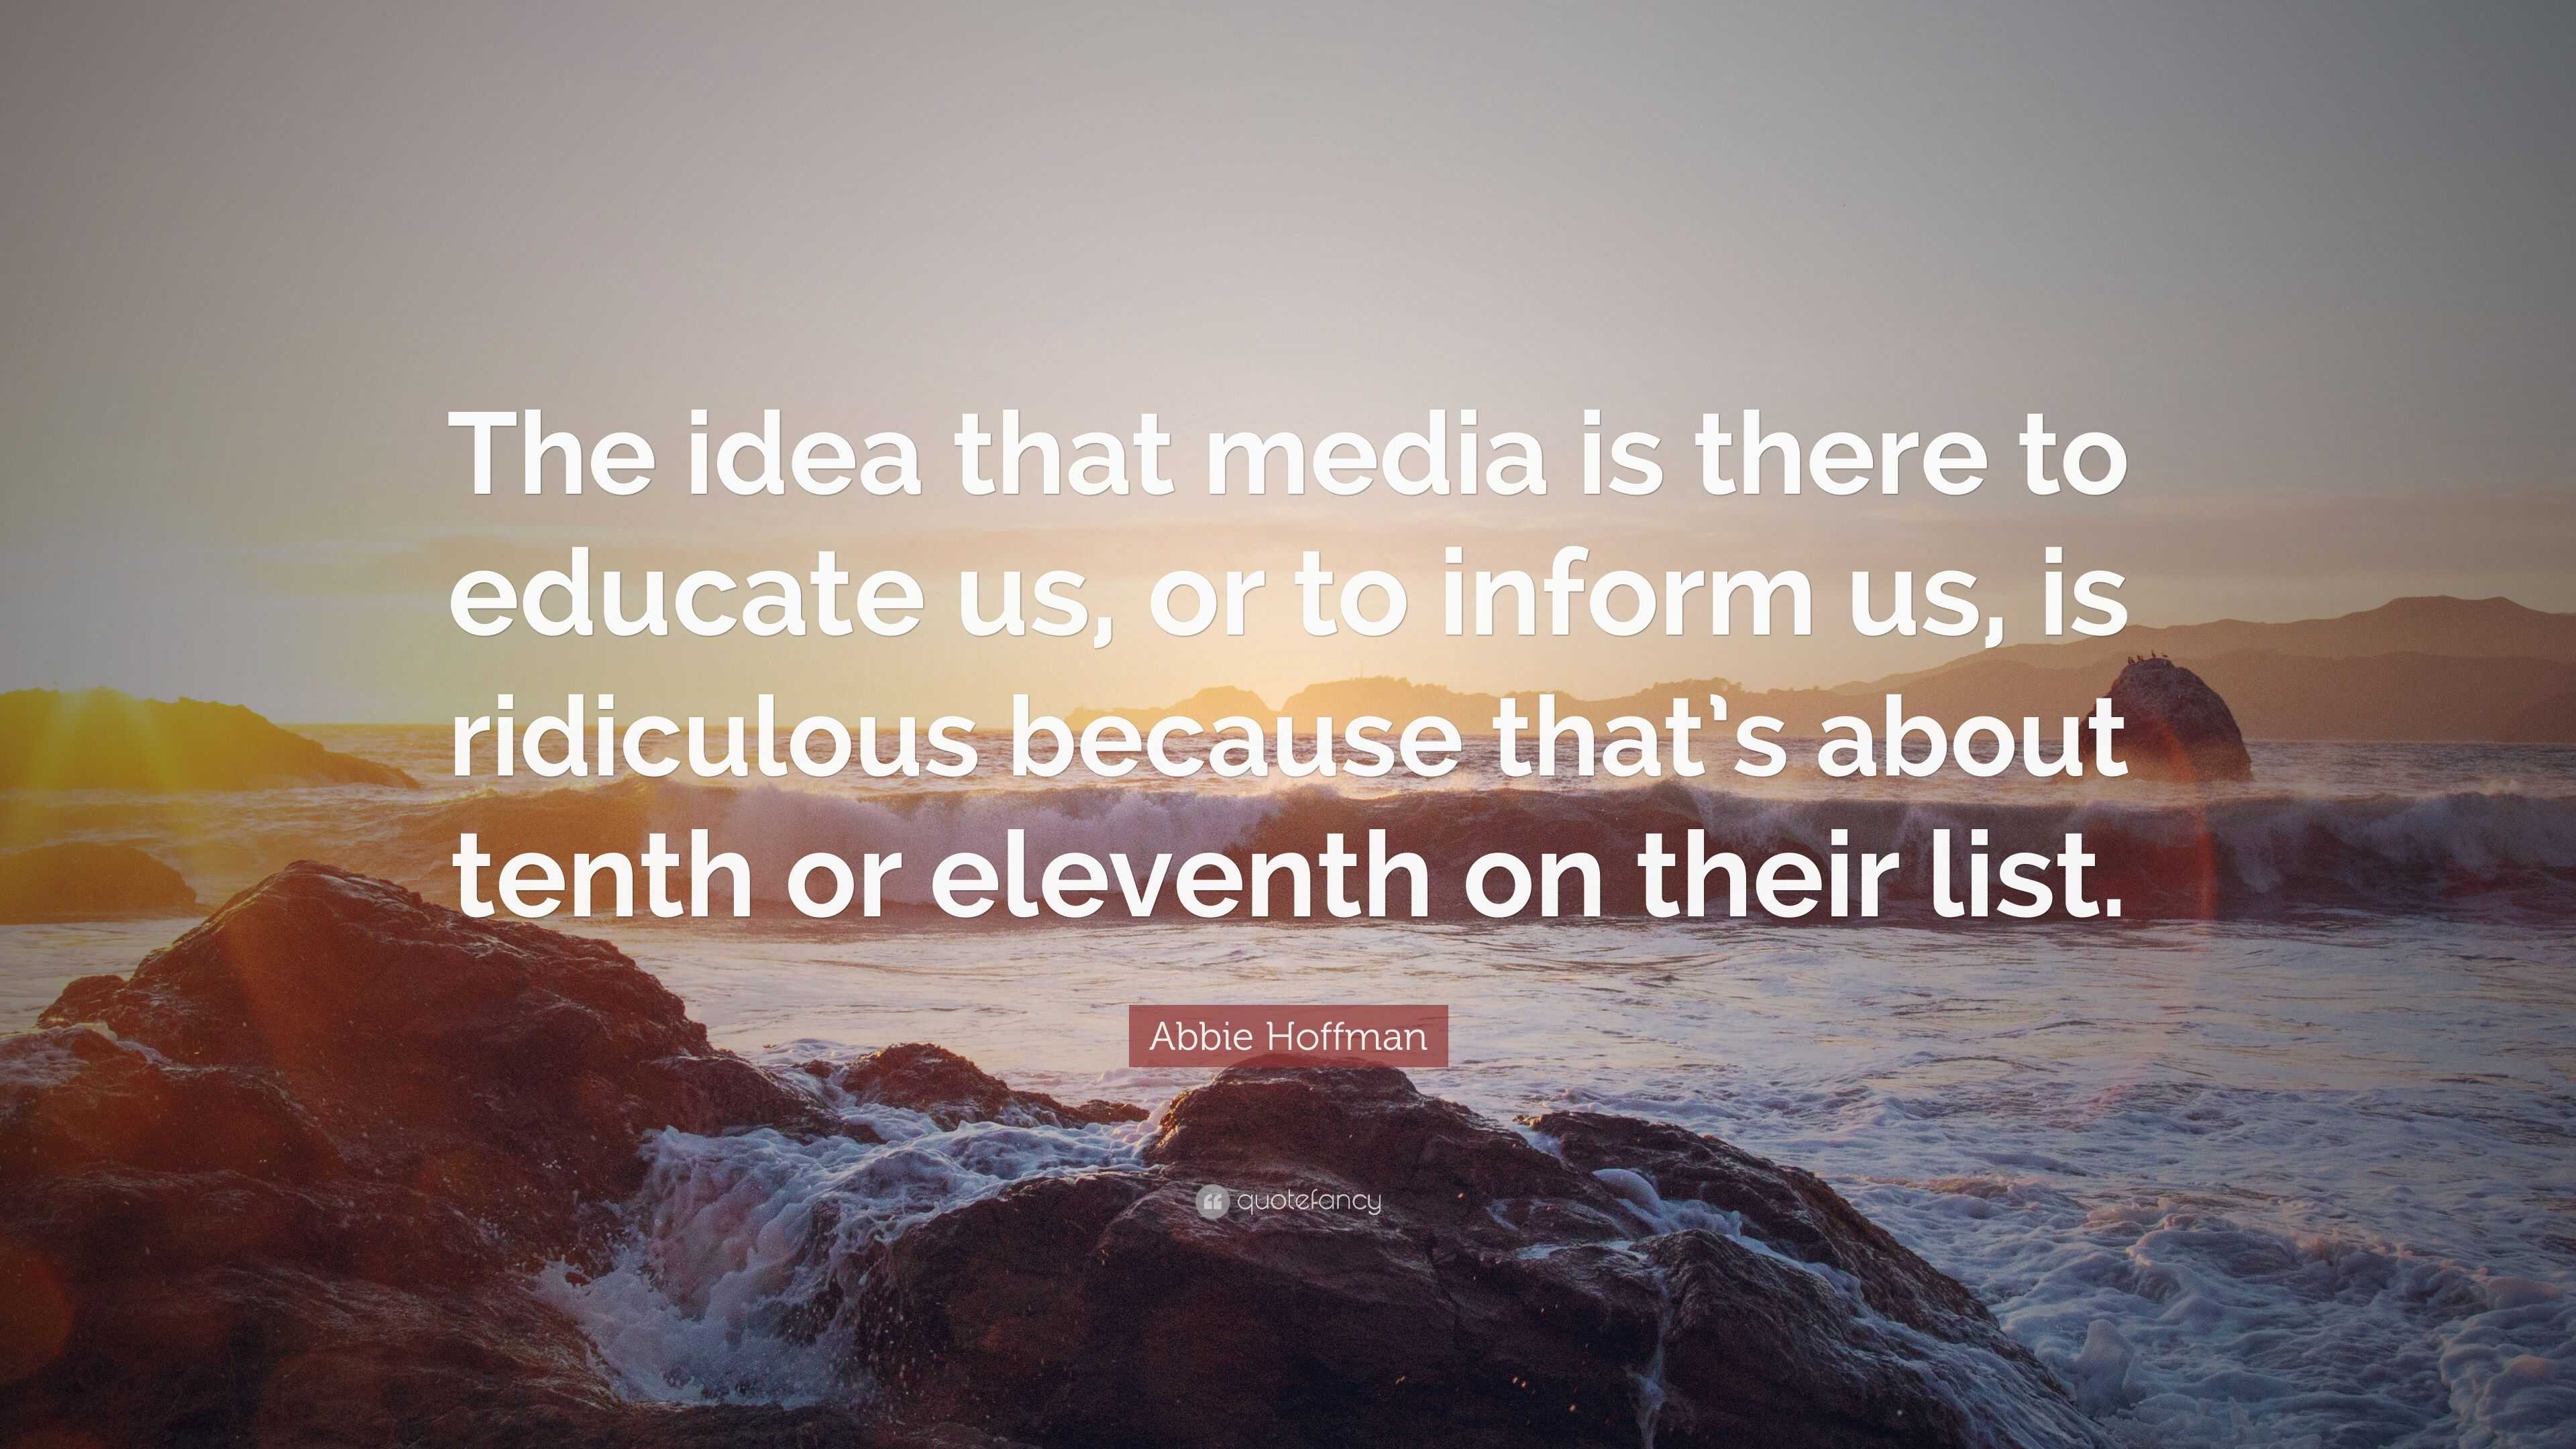 Abbie Hoffman Quote: “The idea that media is there to educate us, or to ...